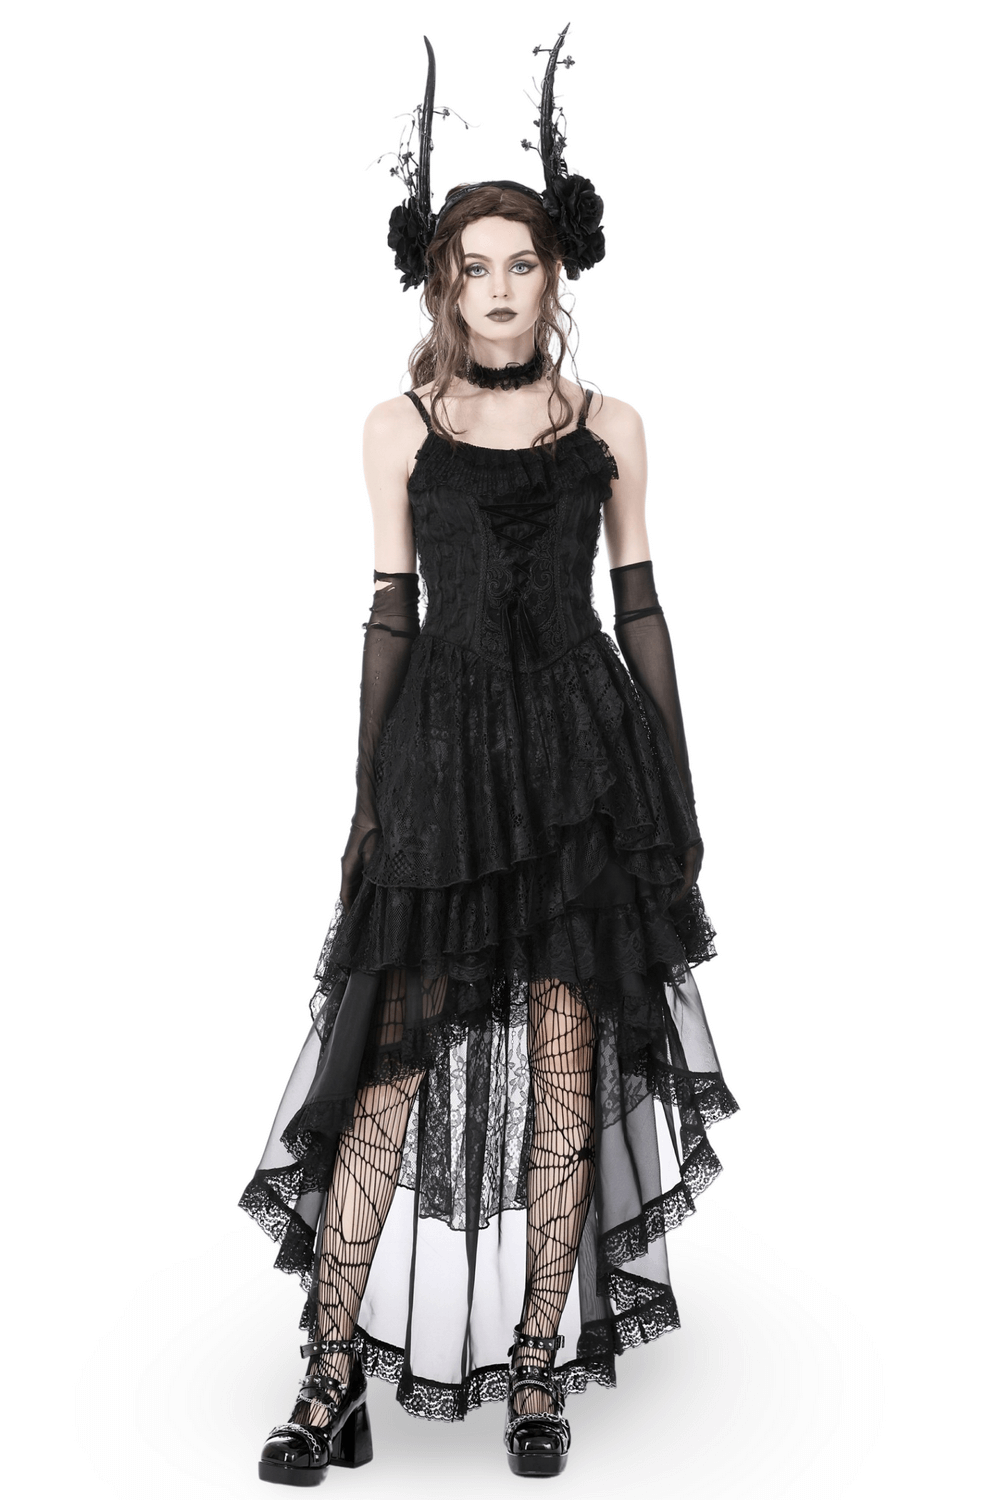 Black Lace High-Low Dress with Romantic Gothic Frills